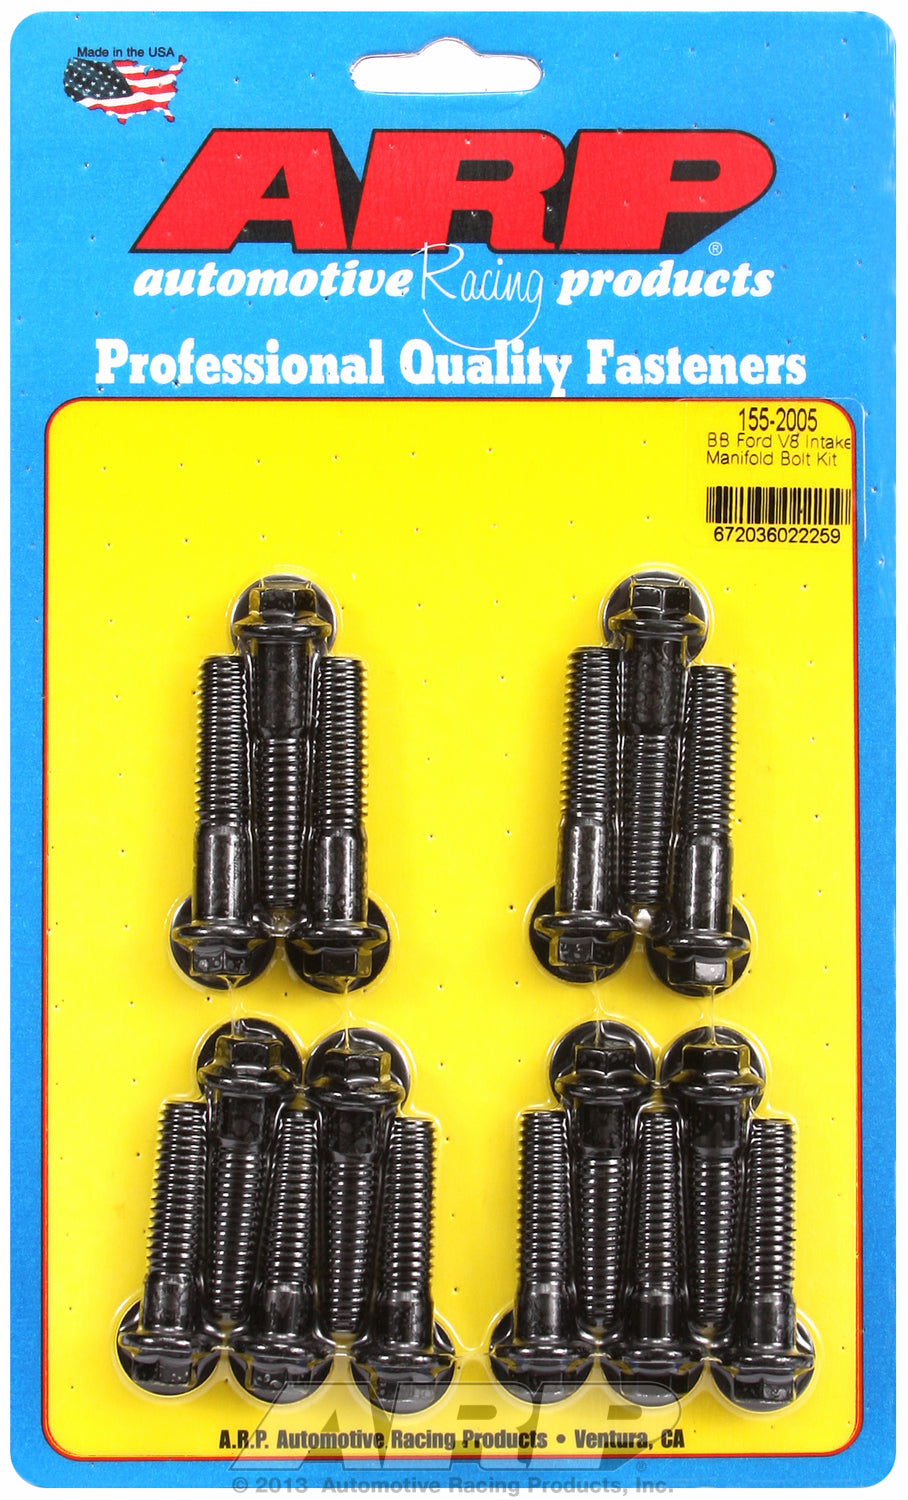 Hex Head Black Oxide Intake Manifold Bolts for Ford 429-460 cid